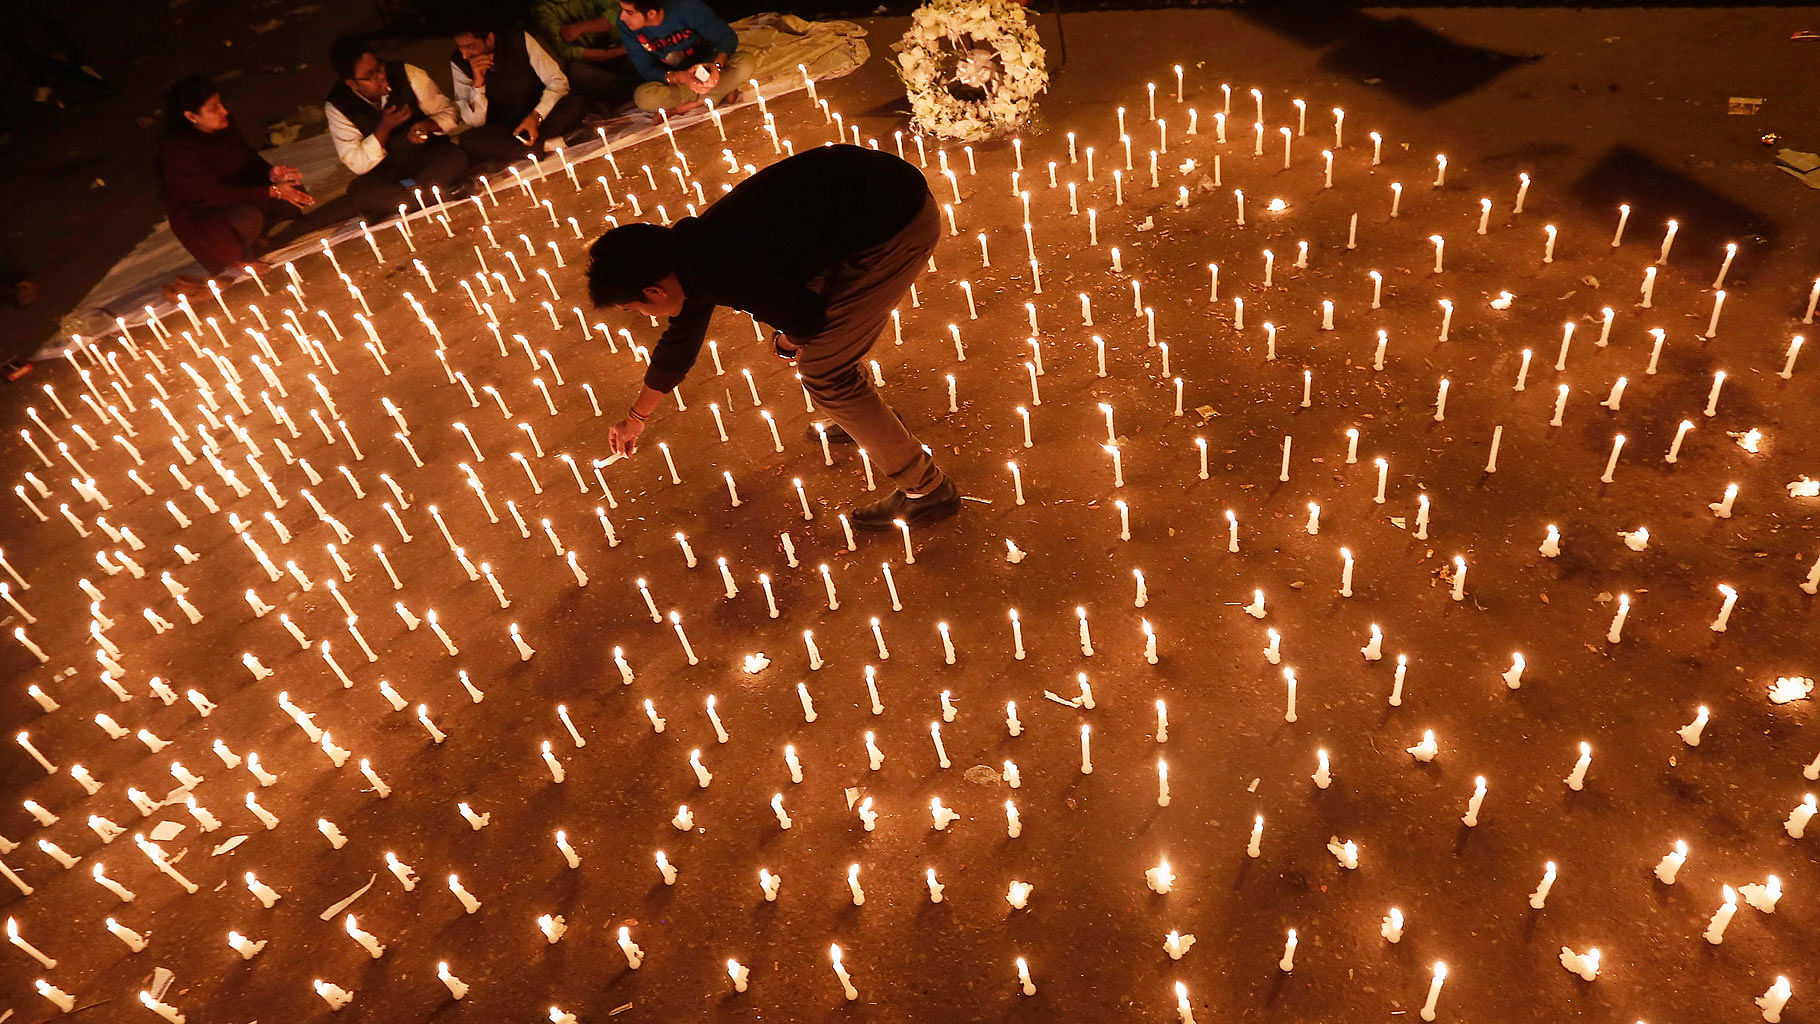 

A protester lights candles during a candlelight vigil to mark the first anniversary of the Delhi gangrape. (Photo: Reuters)